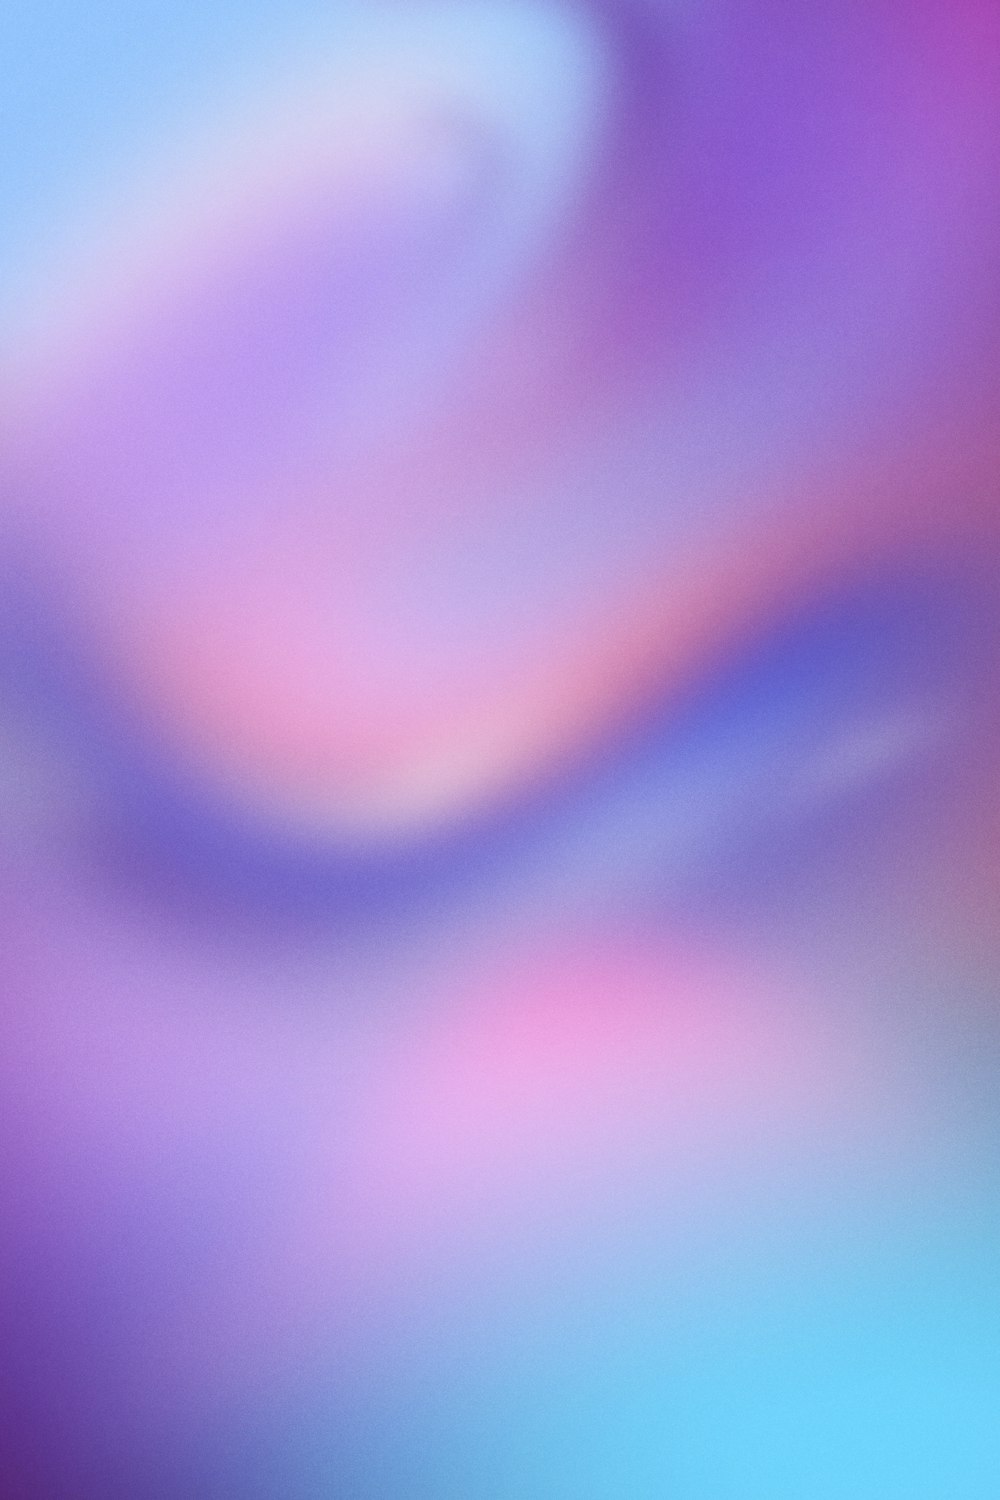 a blurry image of a purple and blue background